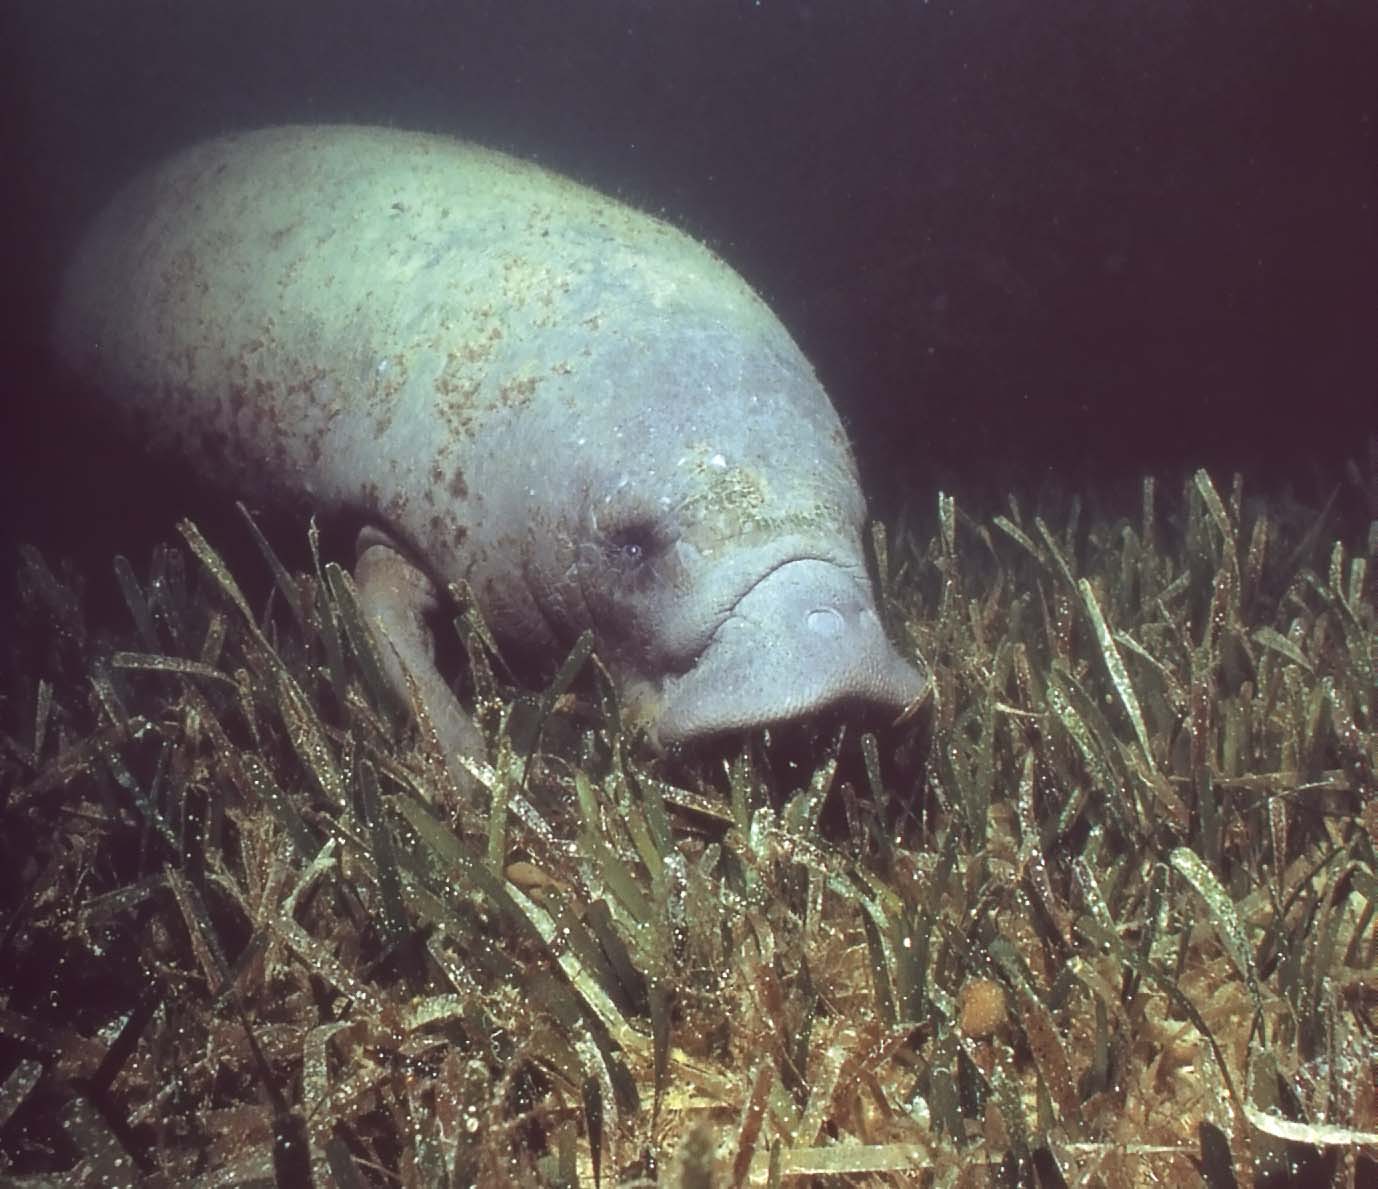 Trichecus manatus grazing on sea floor. Photo provided by University of Central Florida